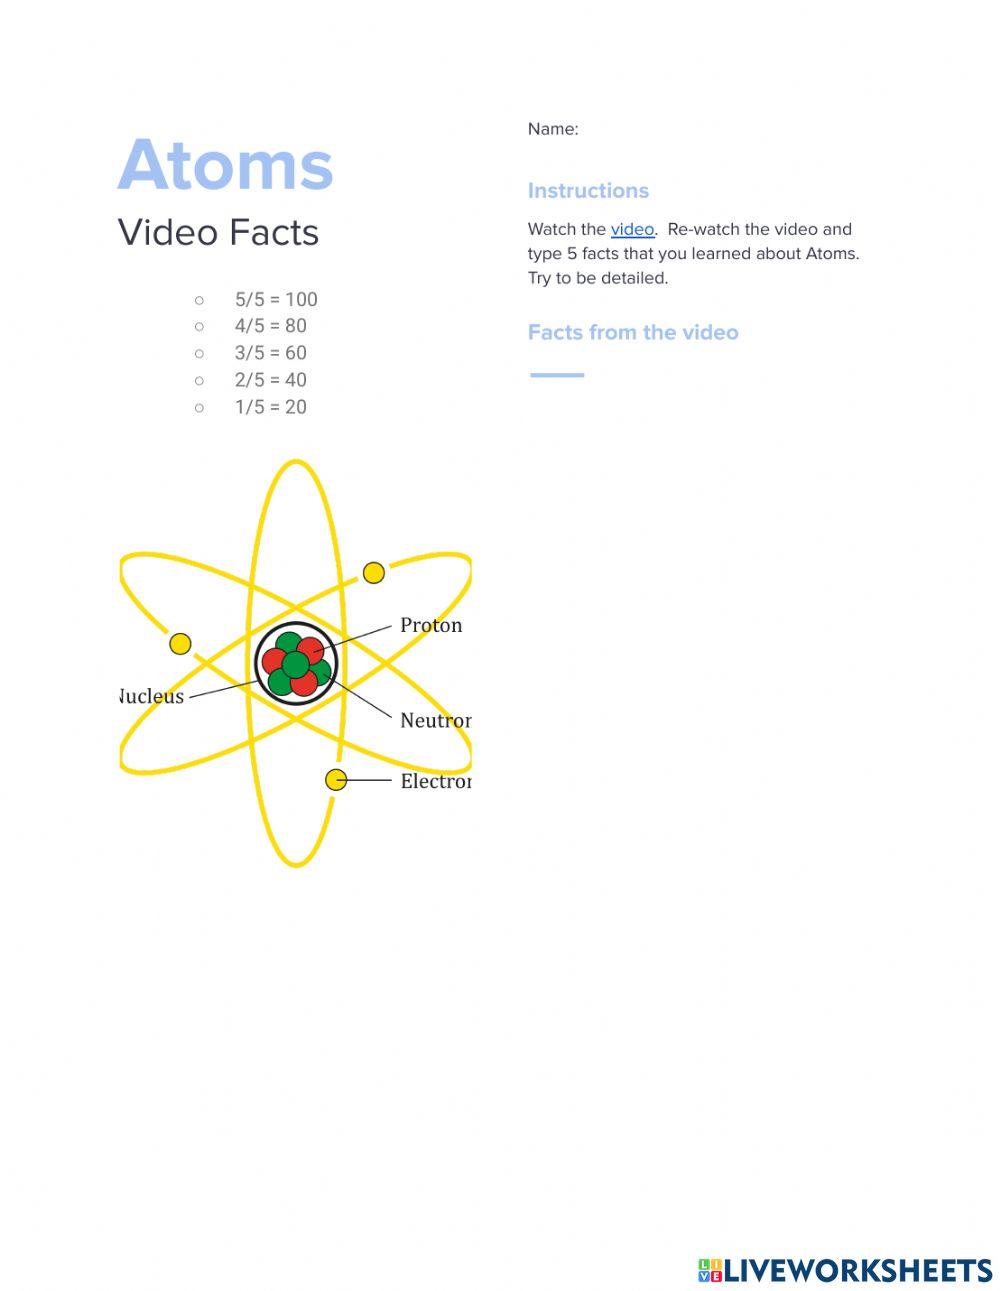 Atoms Video 5 Facts